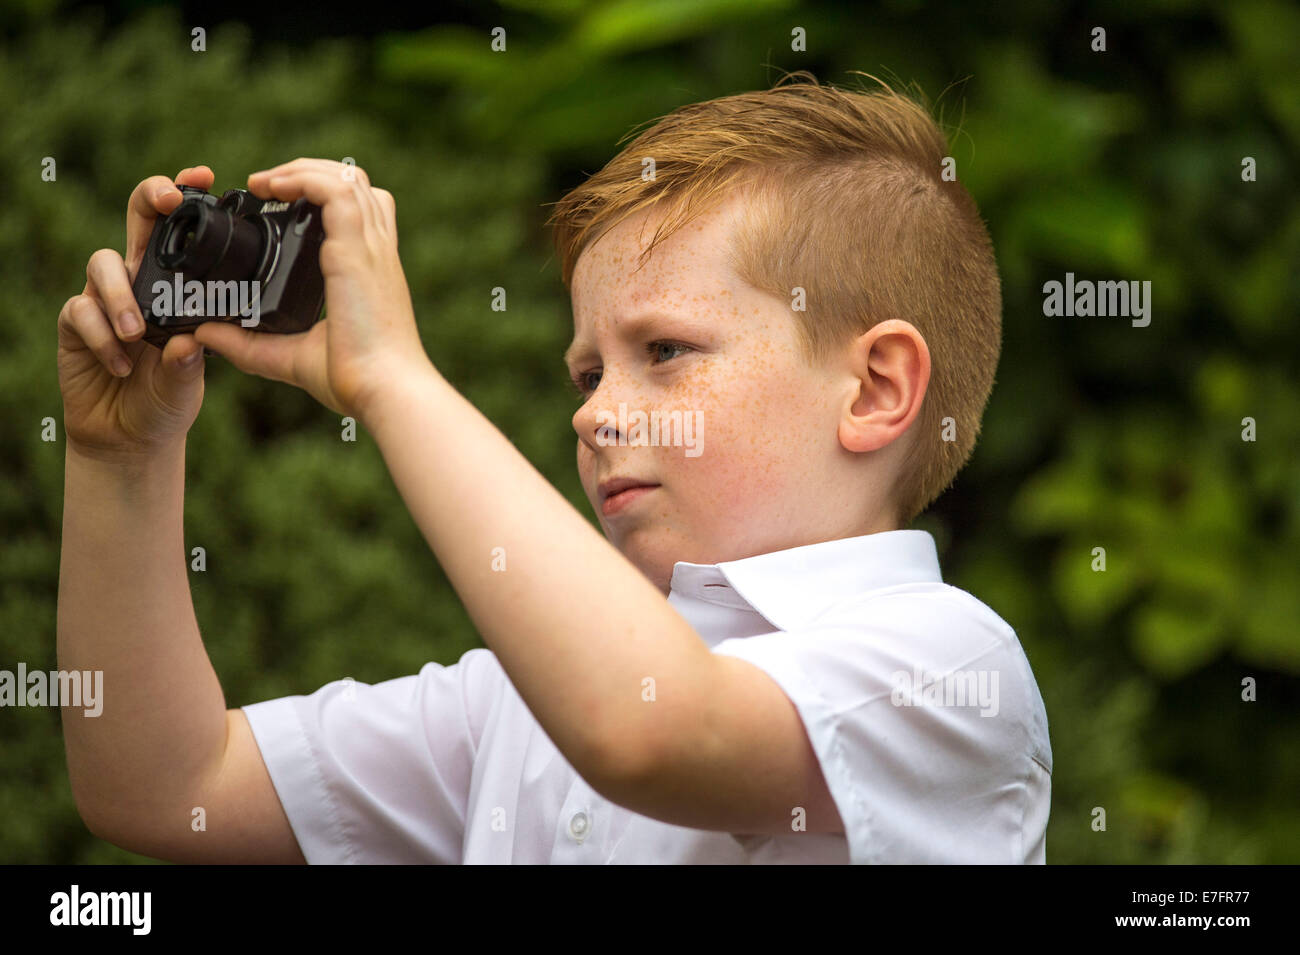 Young boy taking a photograph with a Nikon Coolpix digital camera. Stock Photo